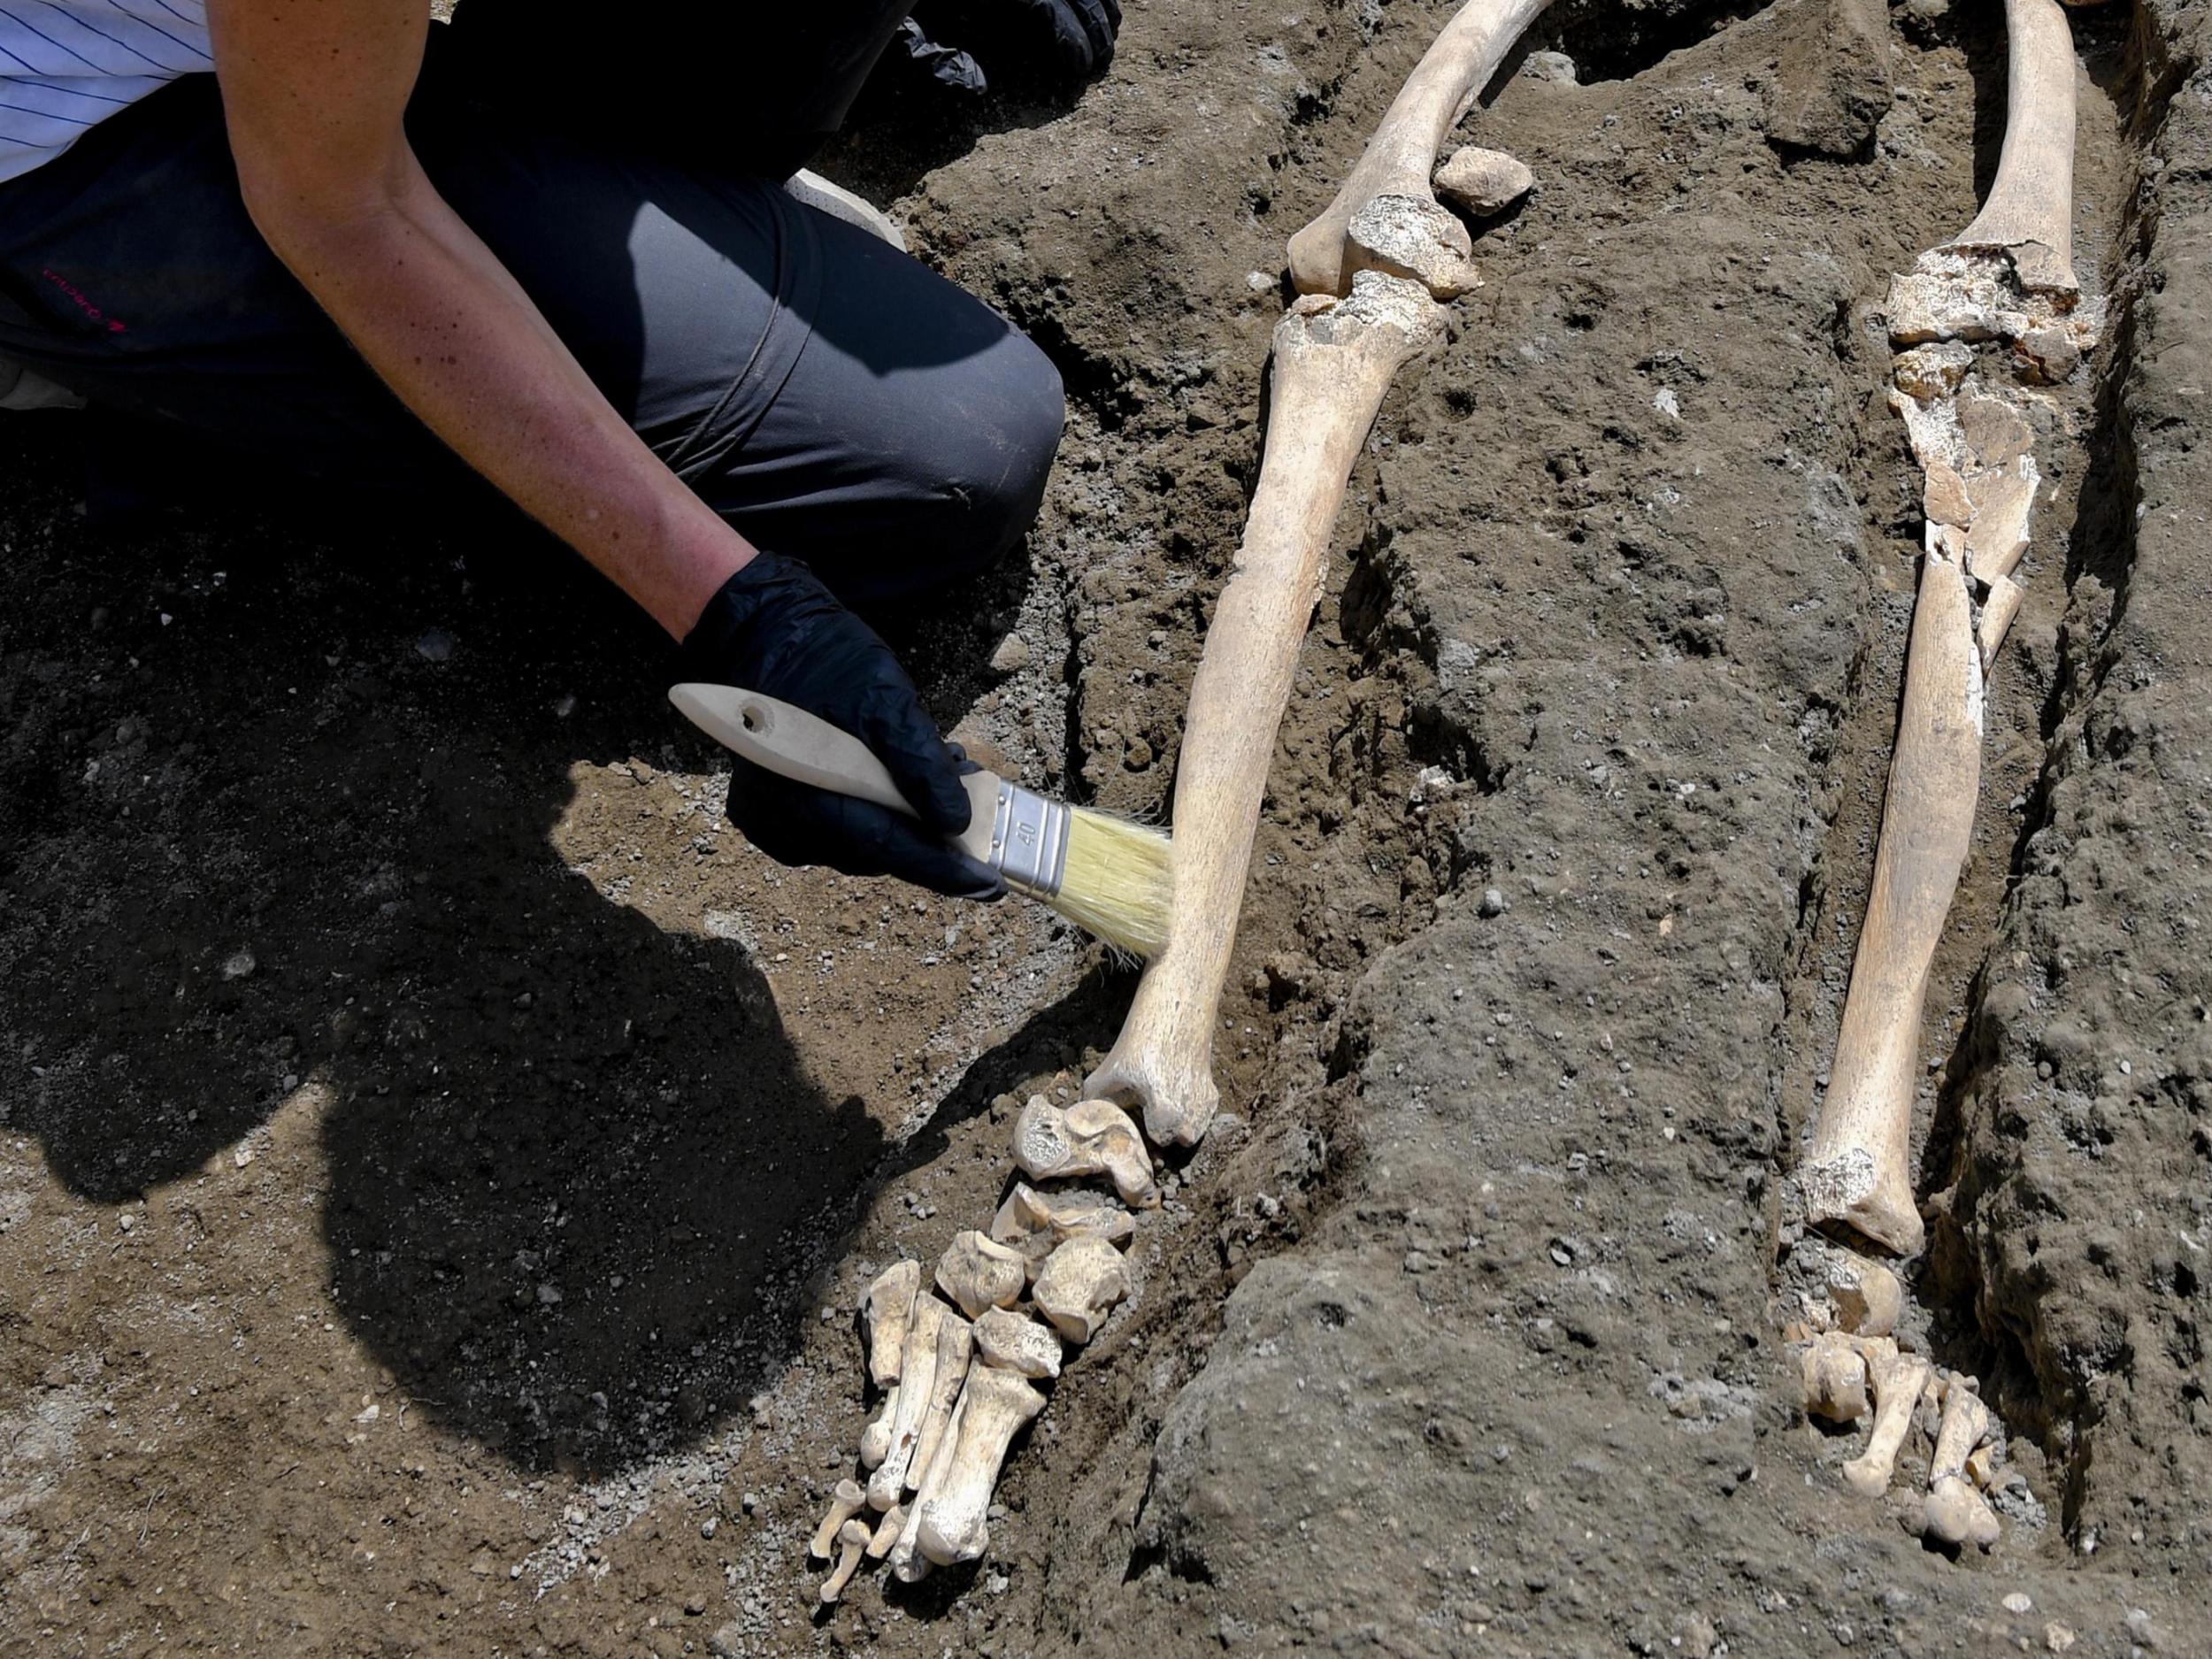 The skeleton of a victim of the eruption that destroyed Pompeii was discovered during recent excavations